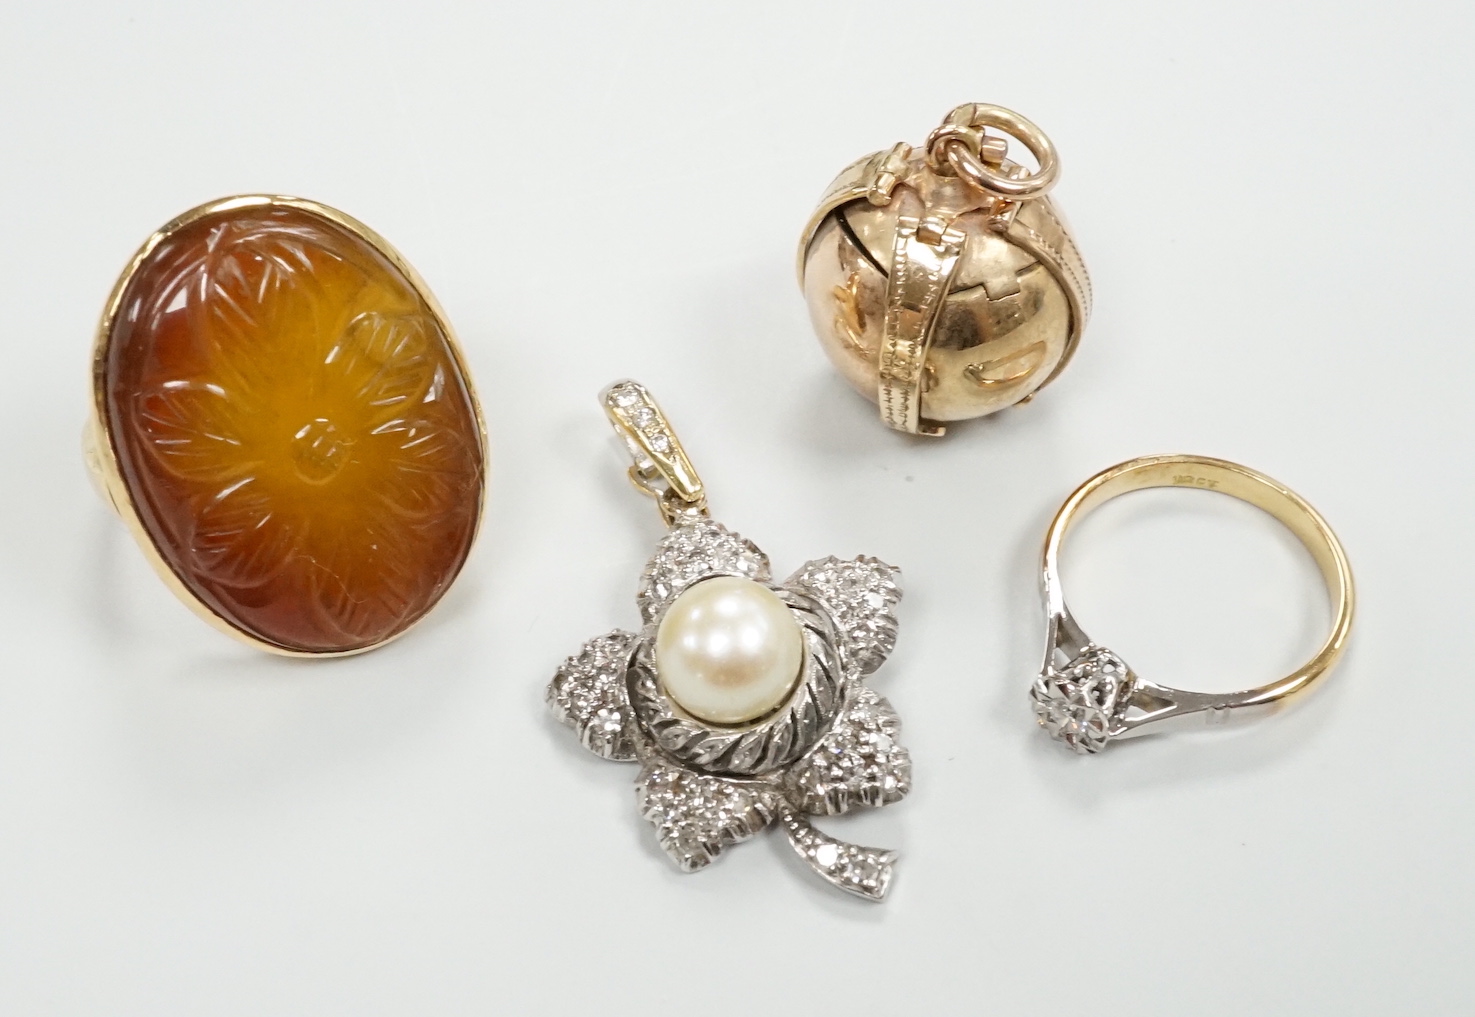 A 9ct masonic ball pendant, 18mm, a 750 white metal cultured pearl and diamond chip set flower head pendant, 38mm, a yellow metal ring and an 18ct and illusion set diamond ring.